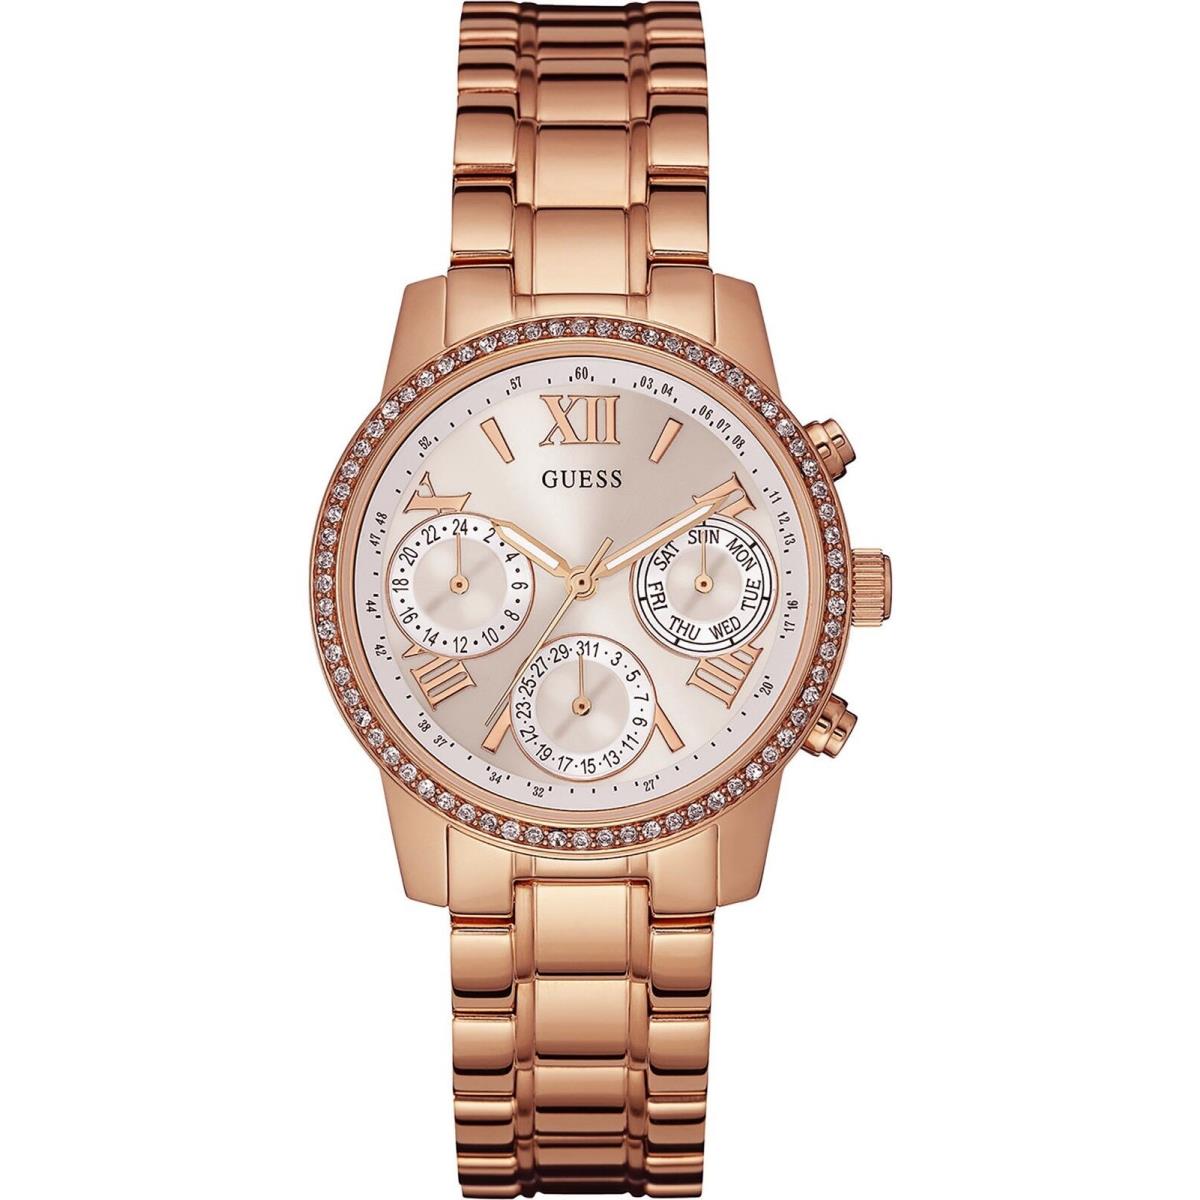 Guess W0623L2 Ladies Dress Multi-function | 041465230014 - Guess watch ...